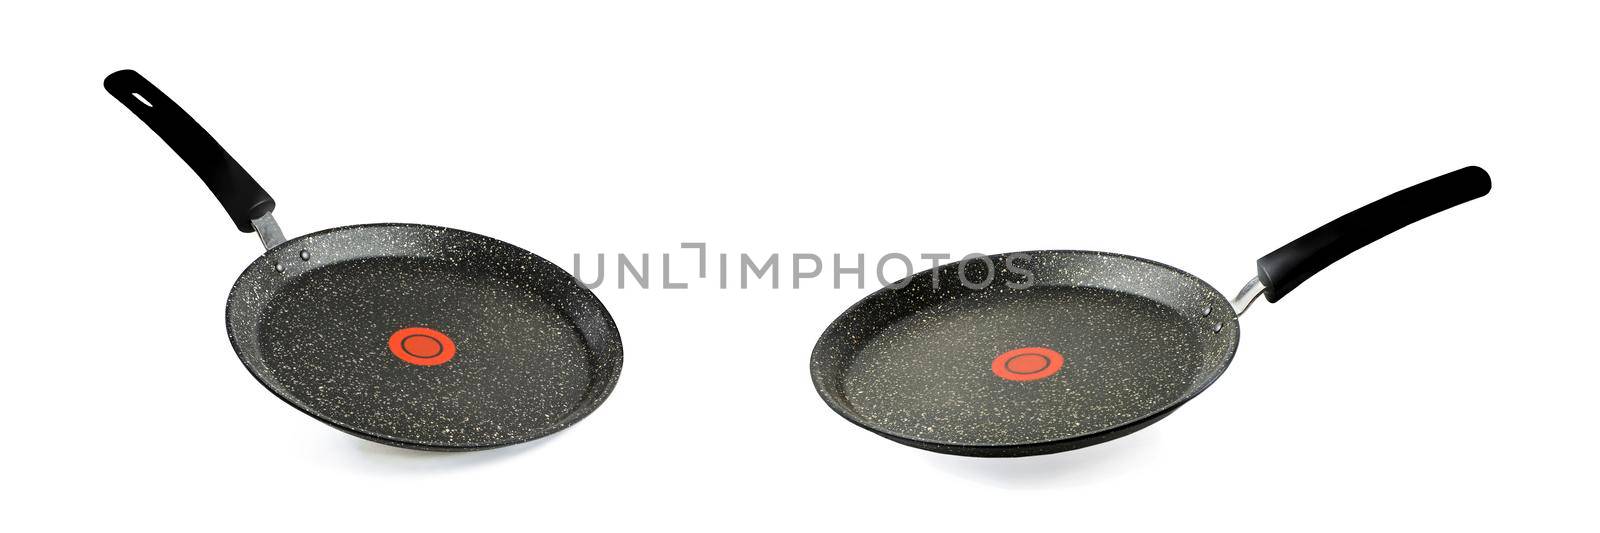 Black frying pan isolated on white background. Frying pan with non-stick coating and red temperature indicator. Isolate with shadow by SERSOL